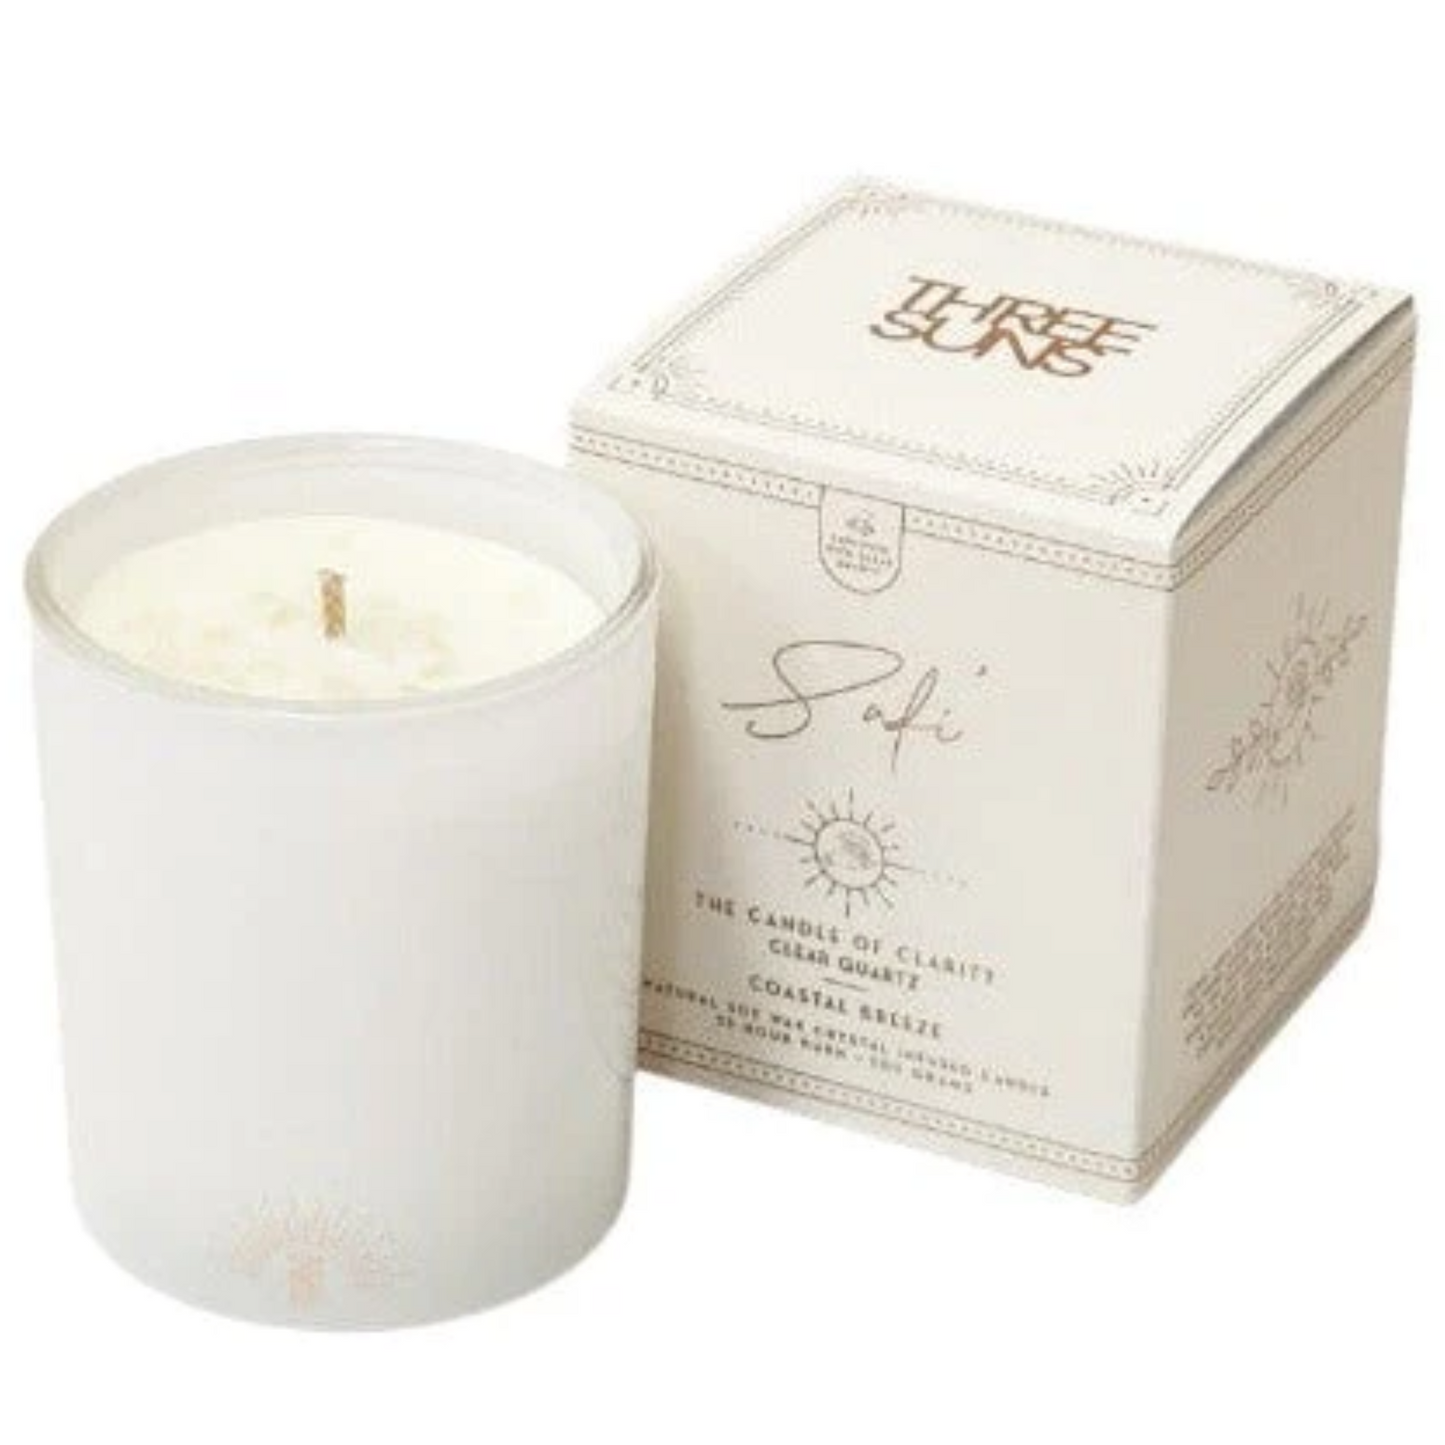 Safi | Crystal Infused Candle of Clarity | Coastal Breeze